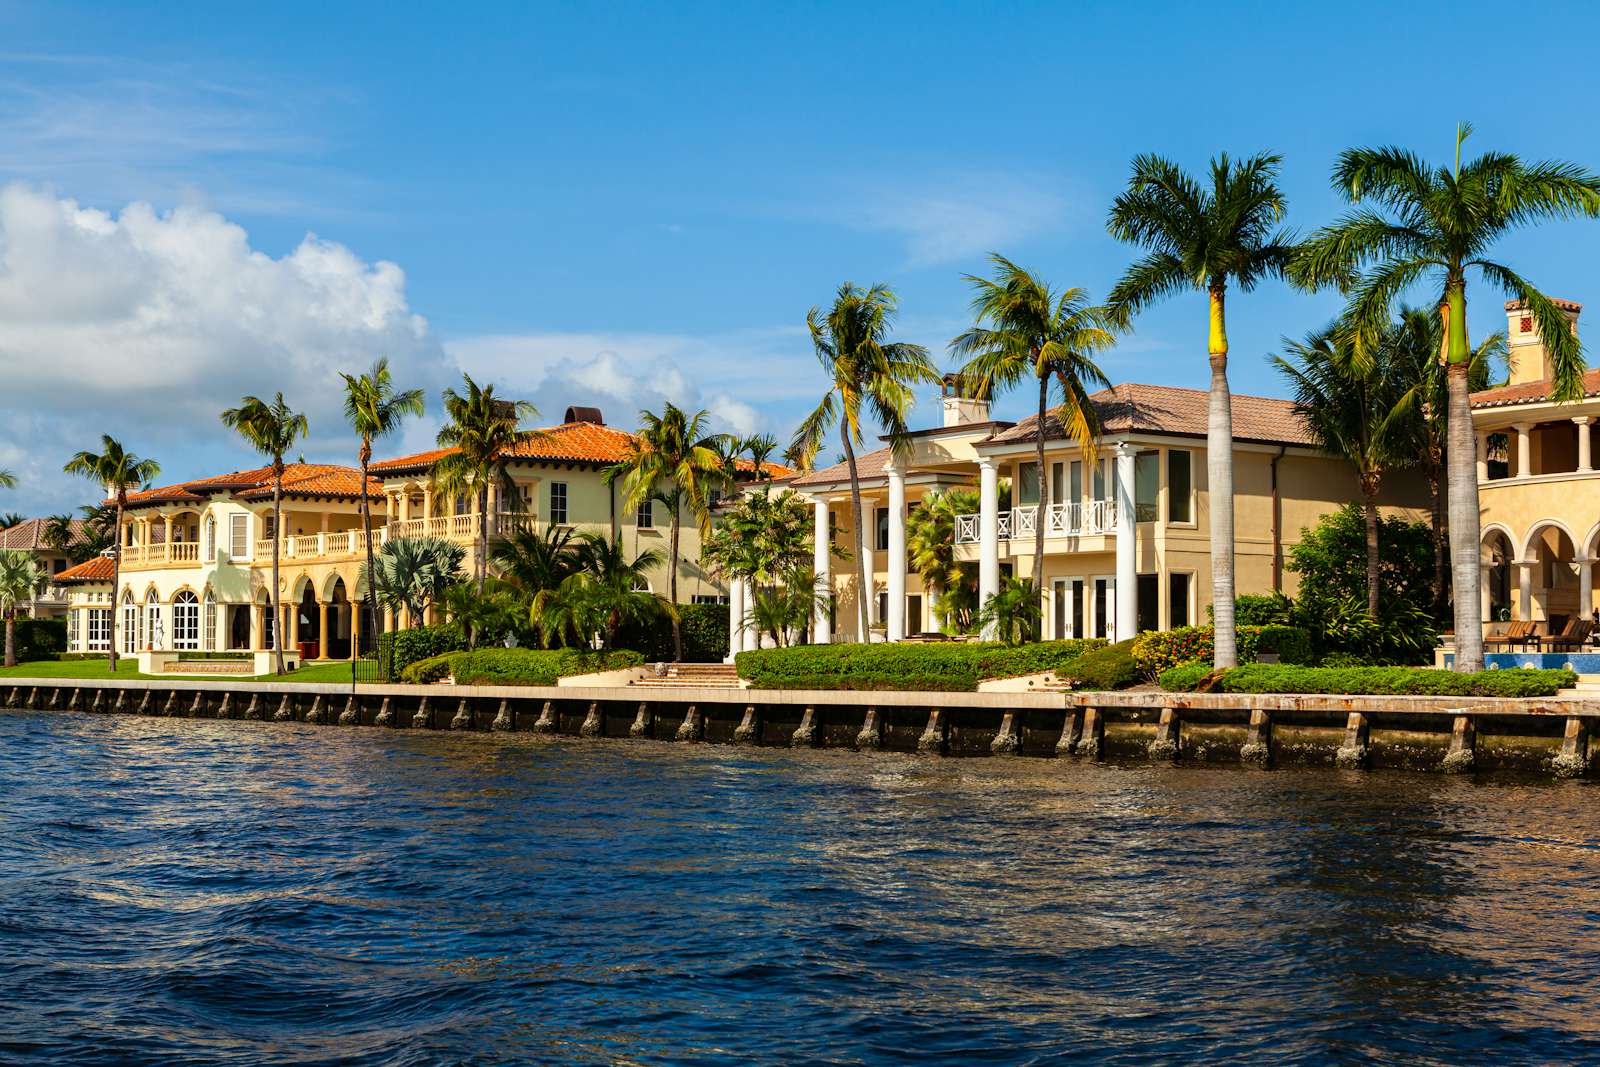 Luxury waterfront homes along the Fort Lauderdale intracoastal waterway in Florida